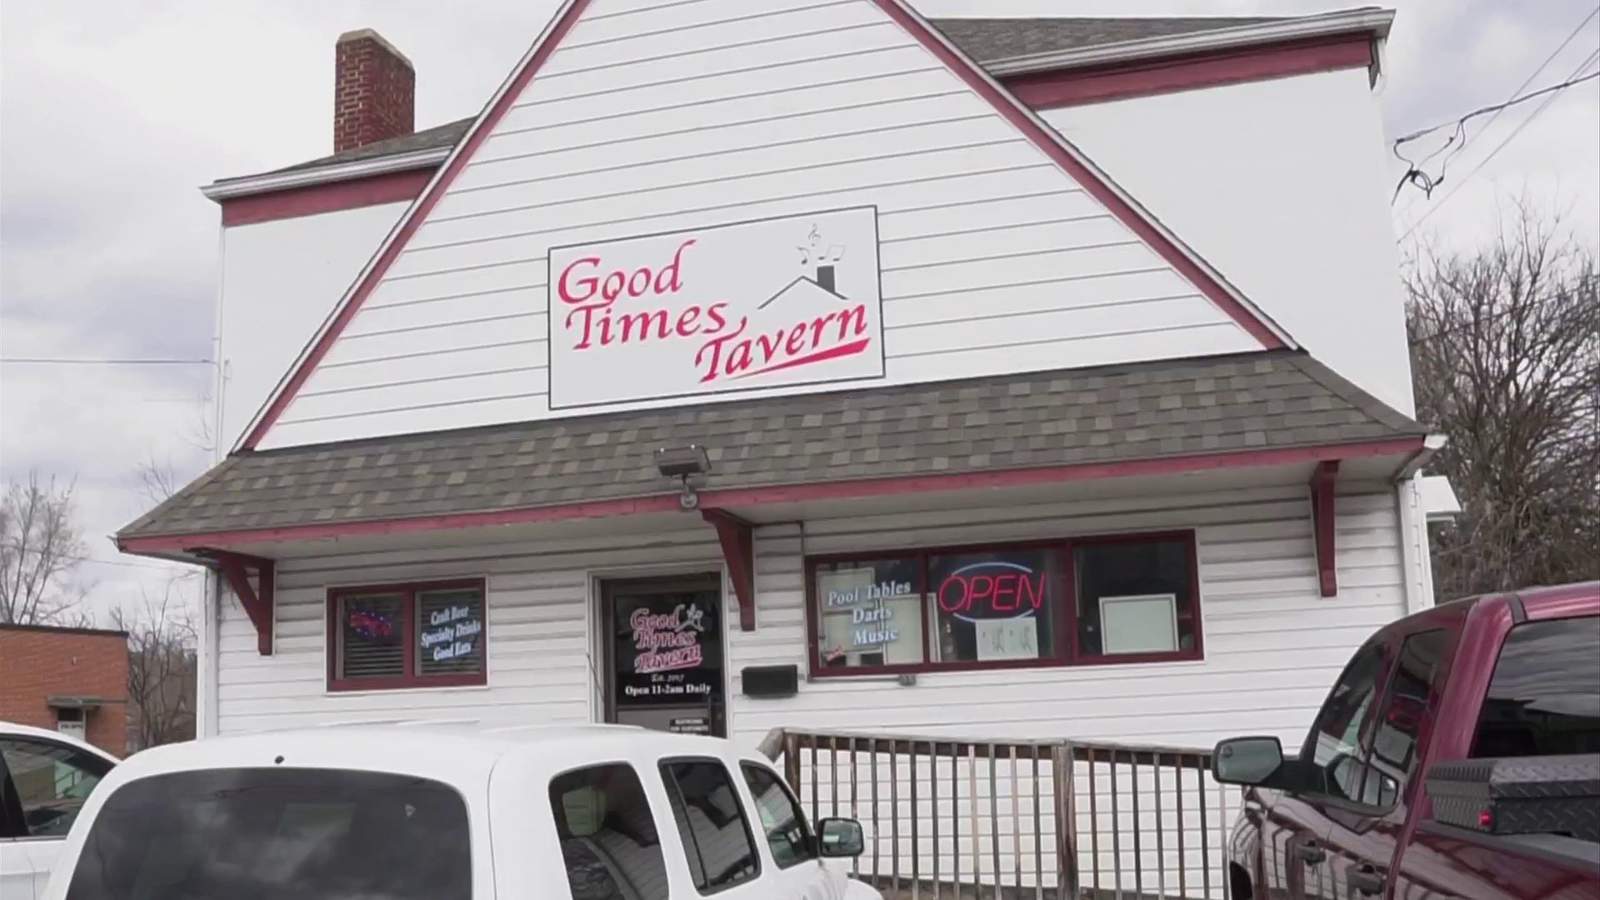 “Good Times Tavern” Wins This Month’s Top 10 Competition